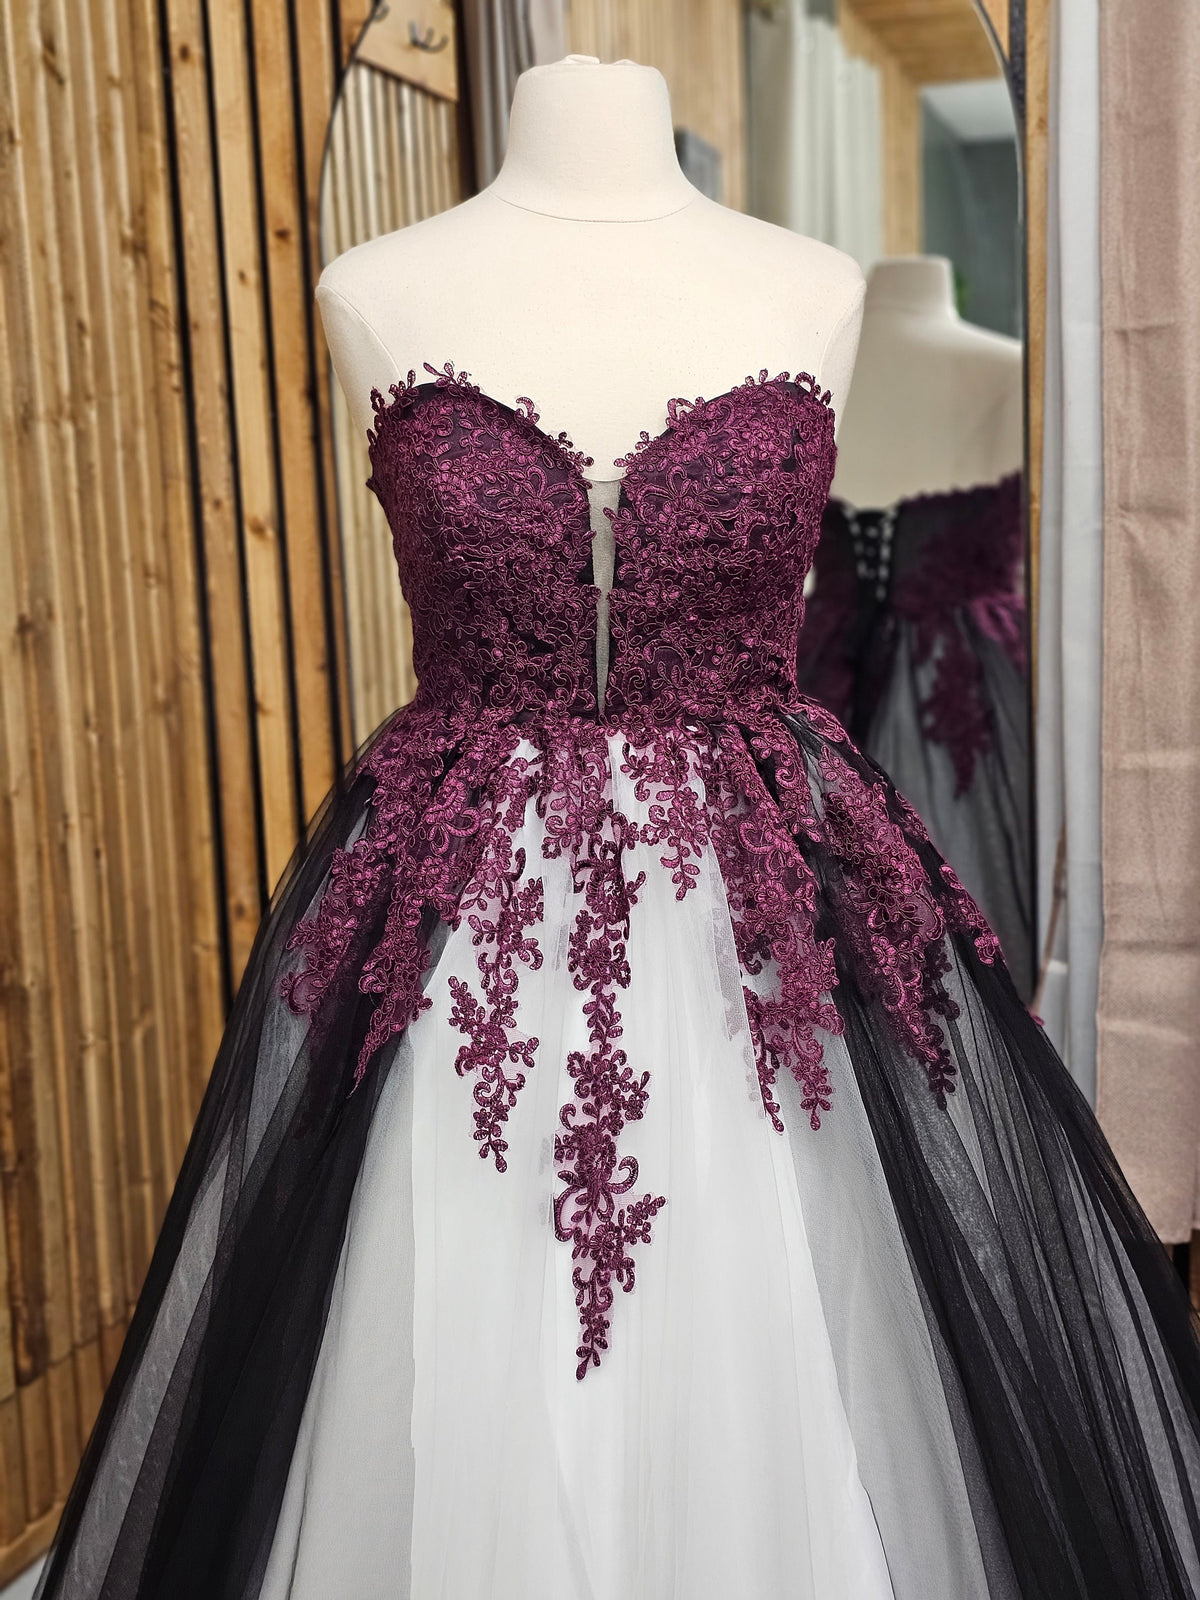 Untraditional Black and Purple Ivory Ball Gown Gothic Wedding Dress Bridal Sleeveless Strapless Lace with Train Sweetheart Neckline Corset